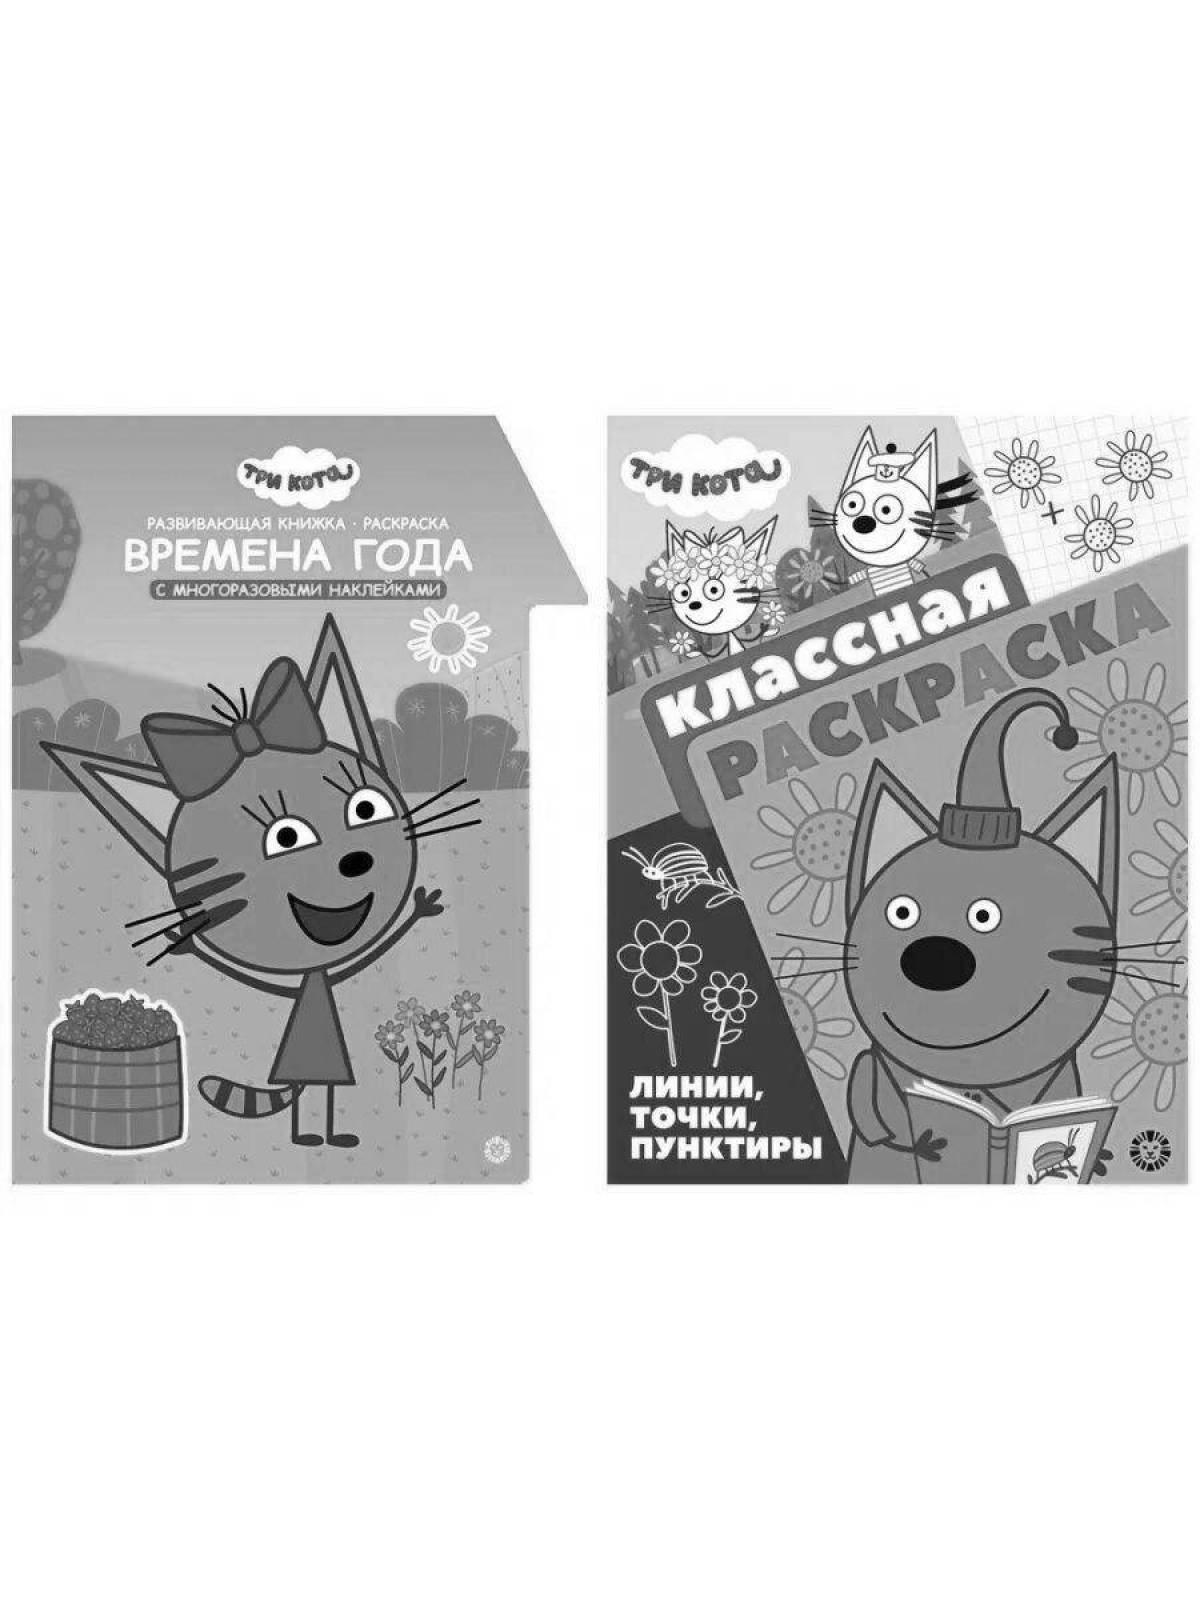 Fun coloring book with three cats stickers